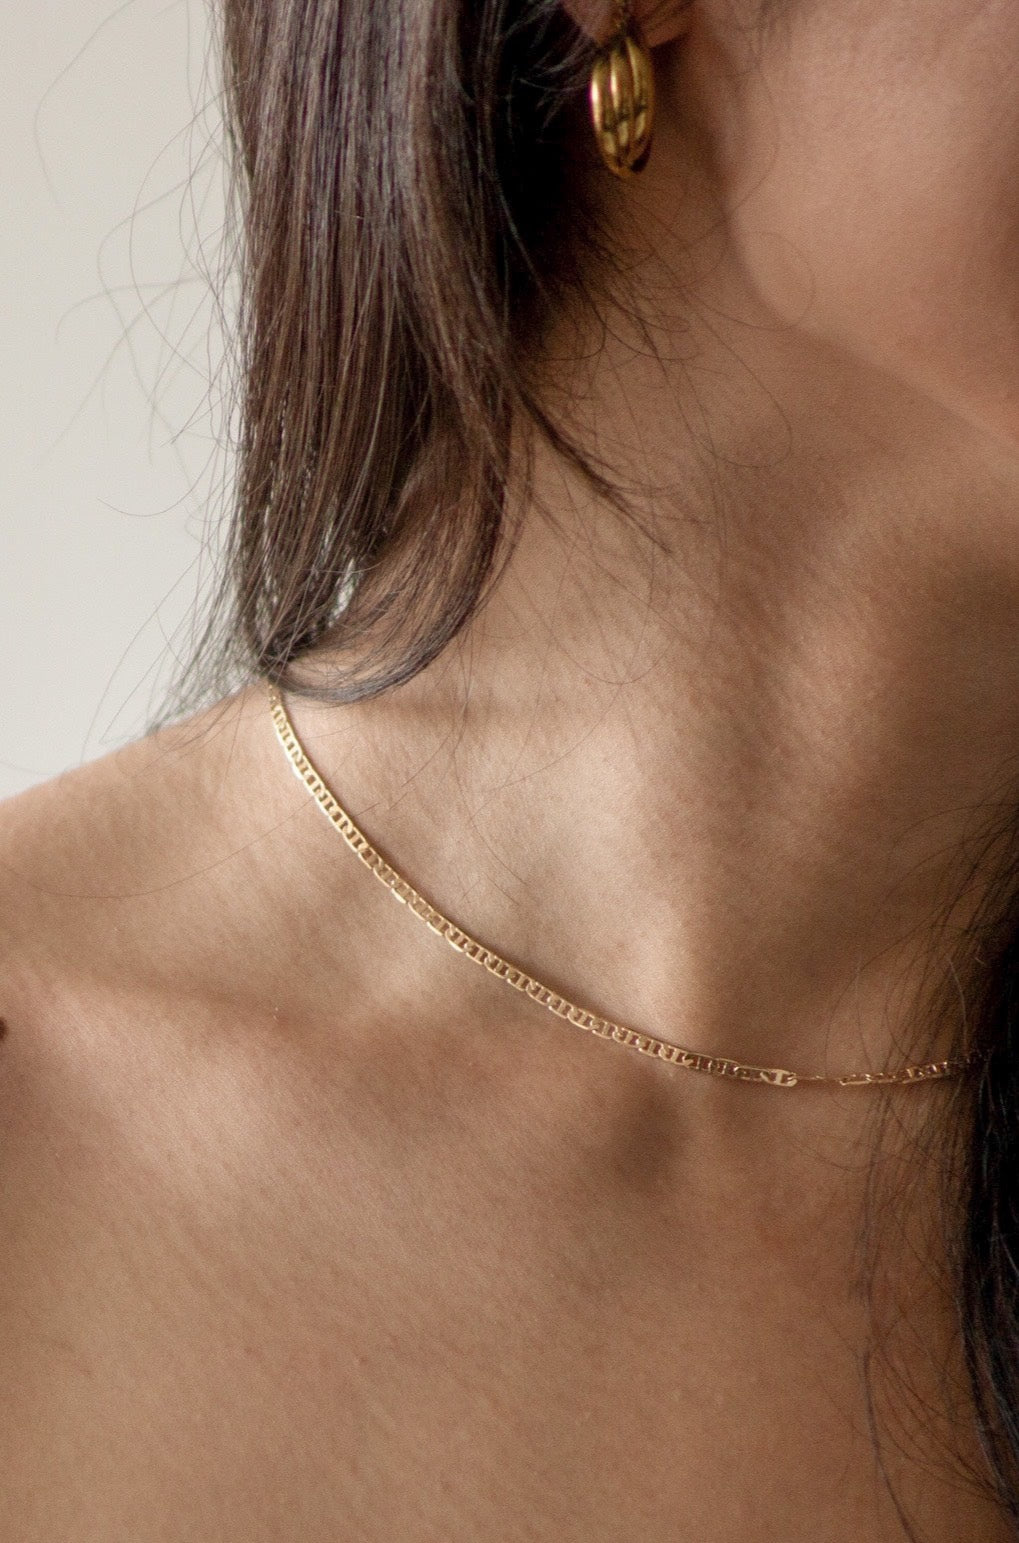 A closer up photo of a model's neck, showcasing the gold chain. In the photo, you can also see the model pairs the necklace with the Enny hoops.